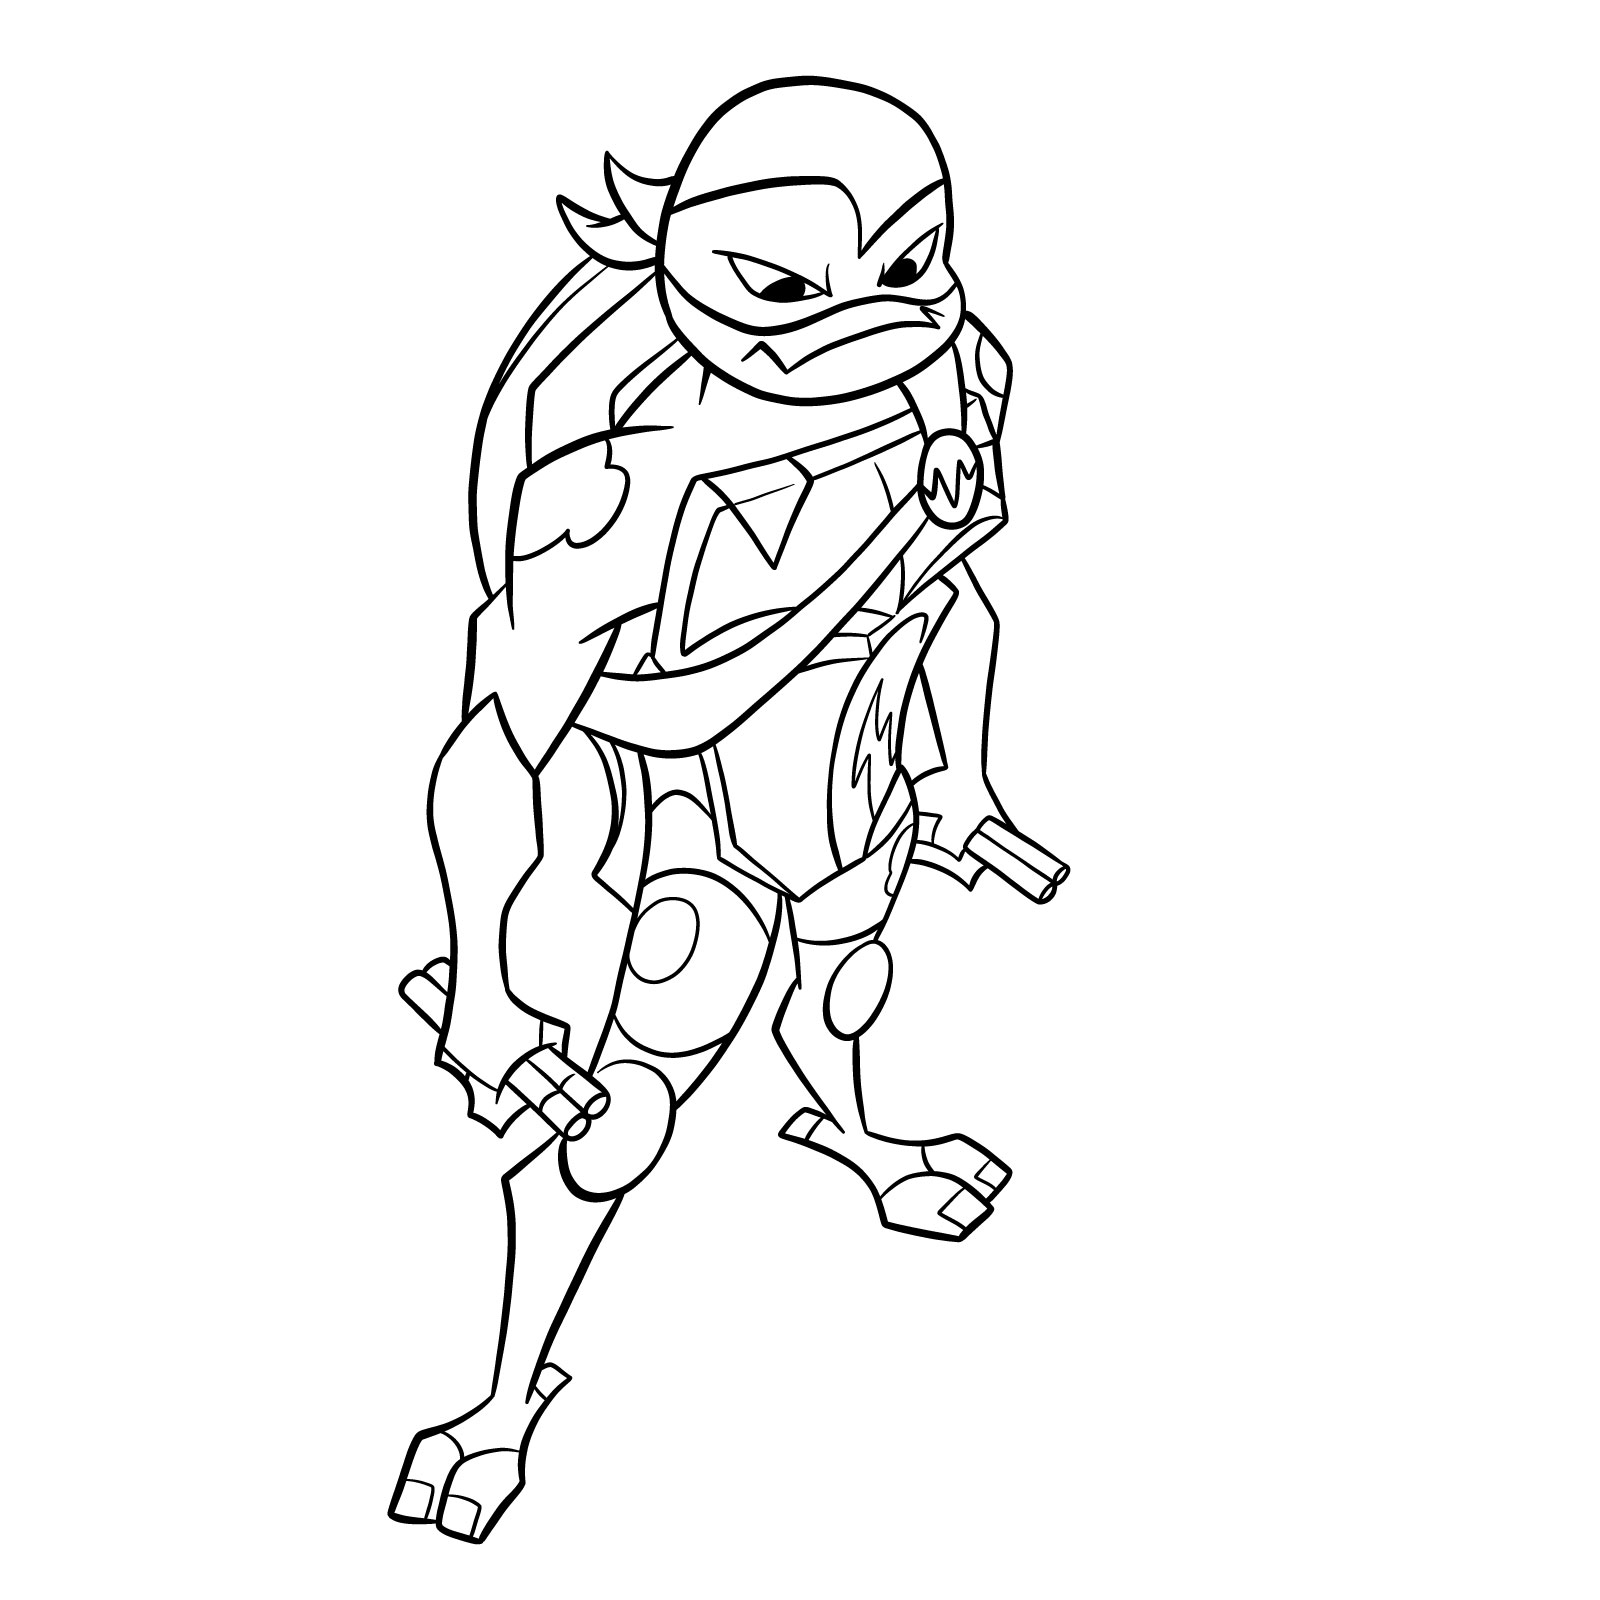 How to draw Mikey in Hamato Ninpō state - final step